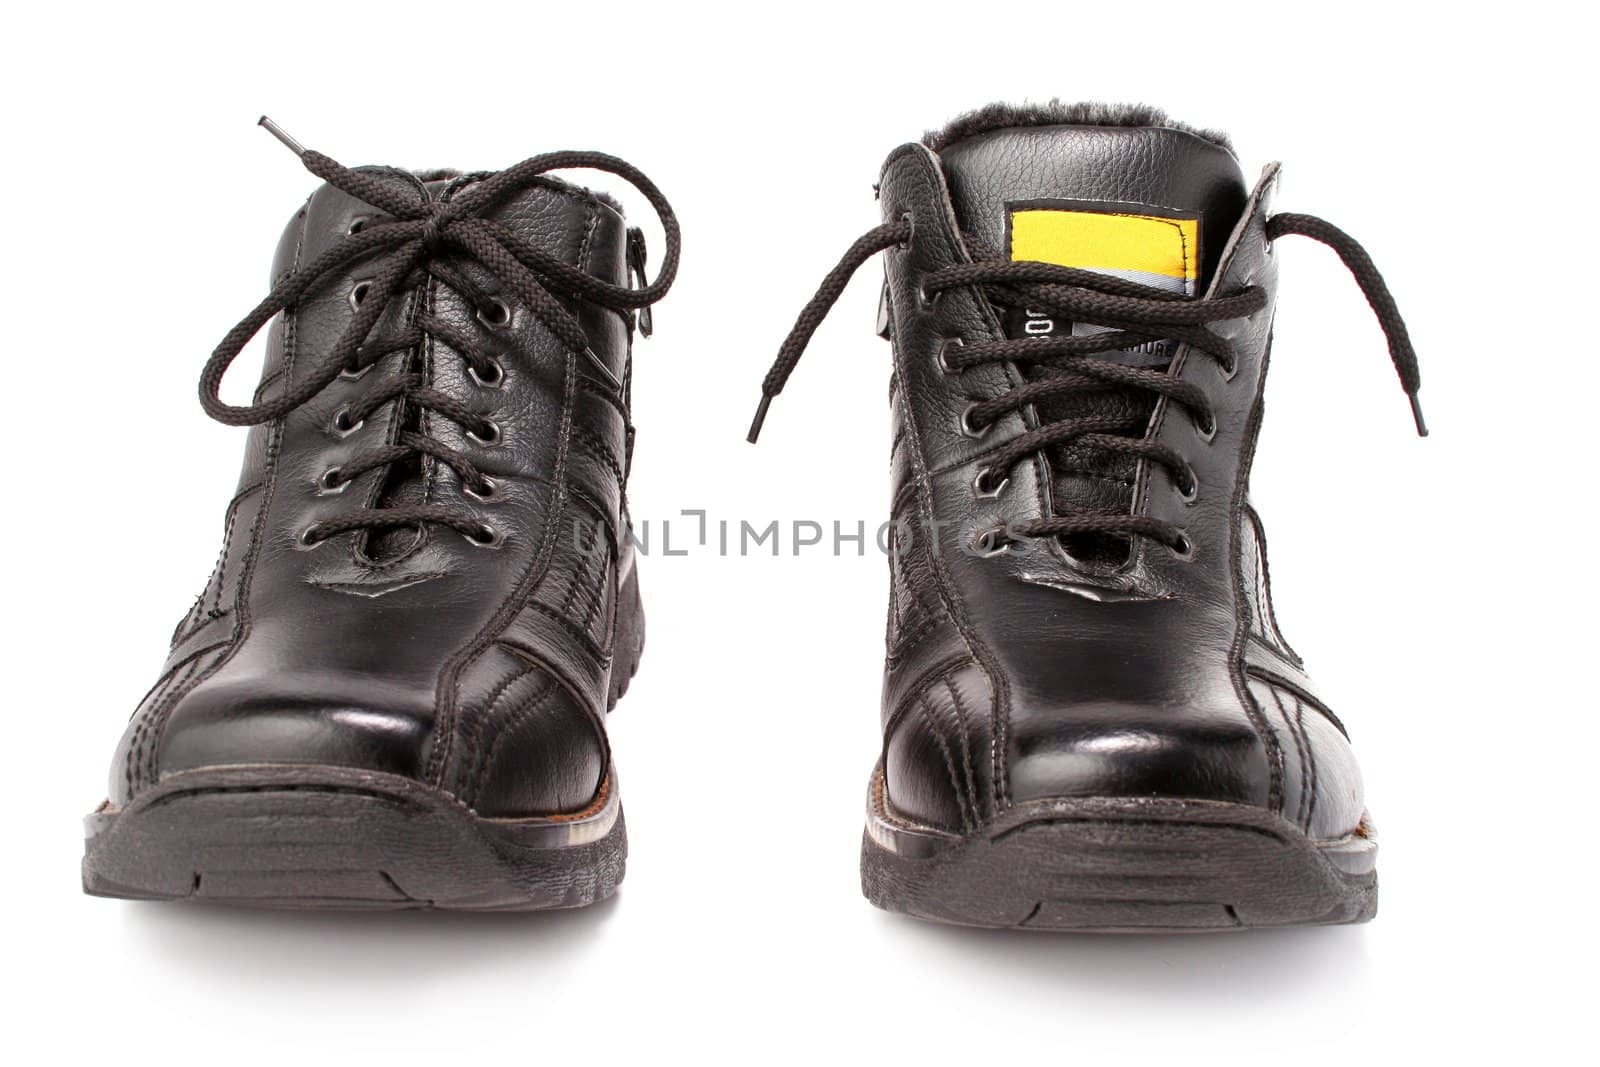 Two man's winter leather boots of black color, isolated on white, (look similar images in my portfolio)